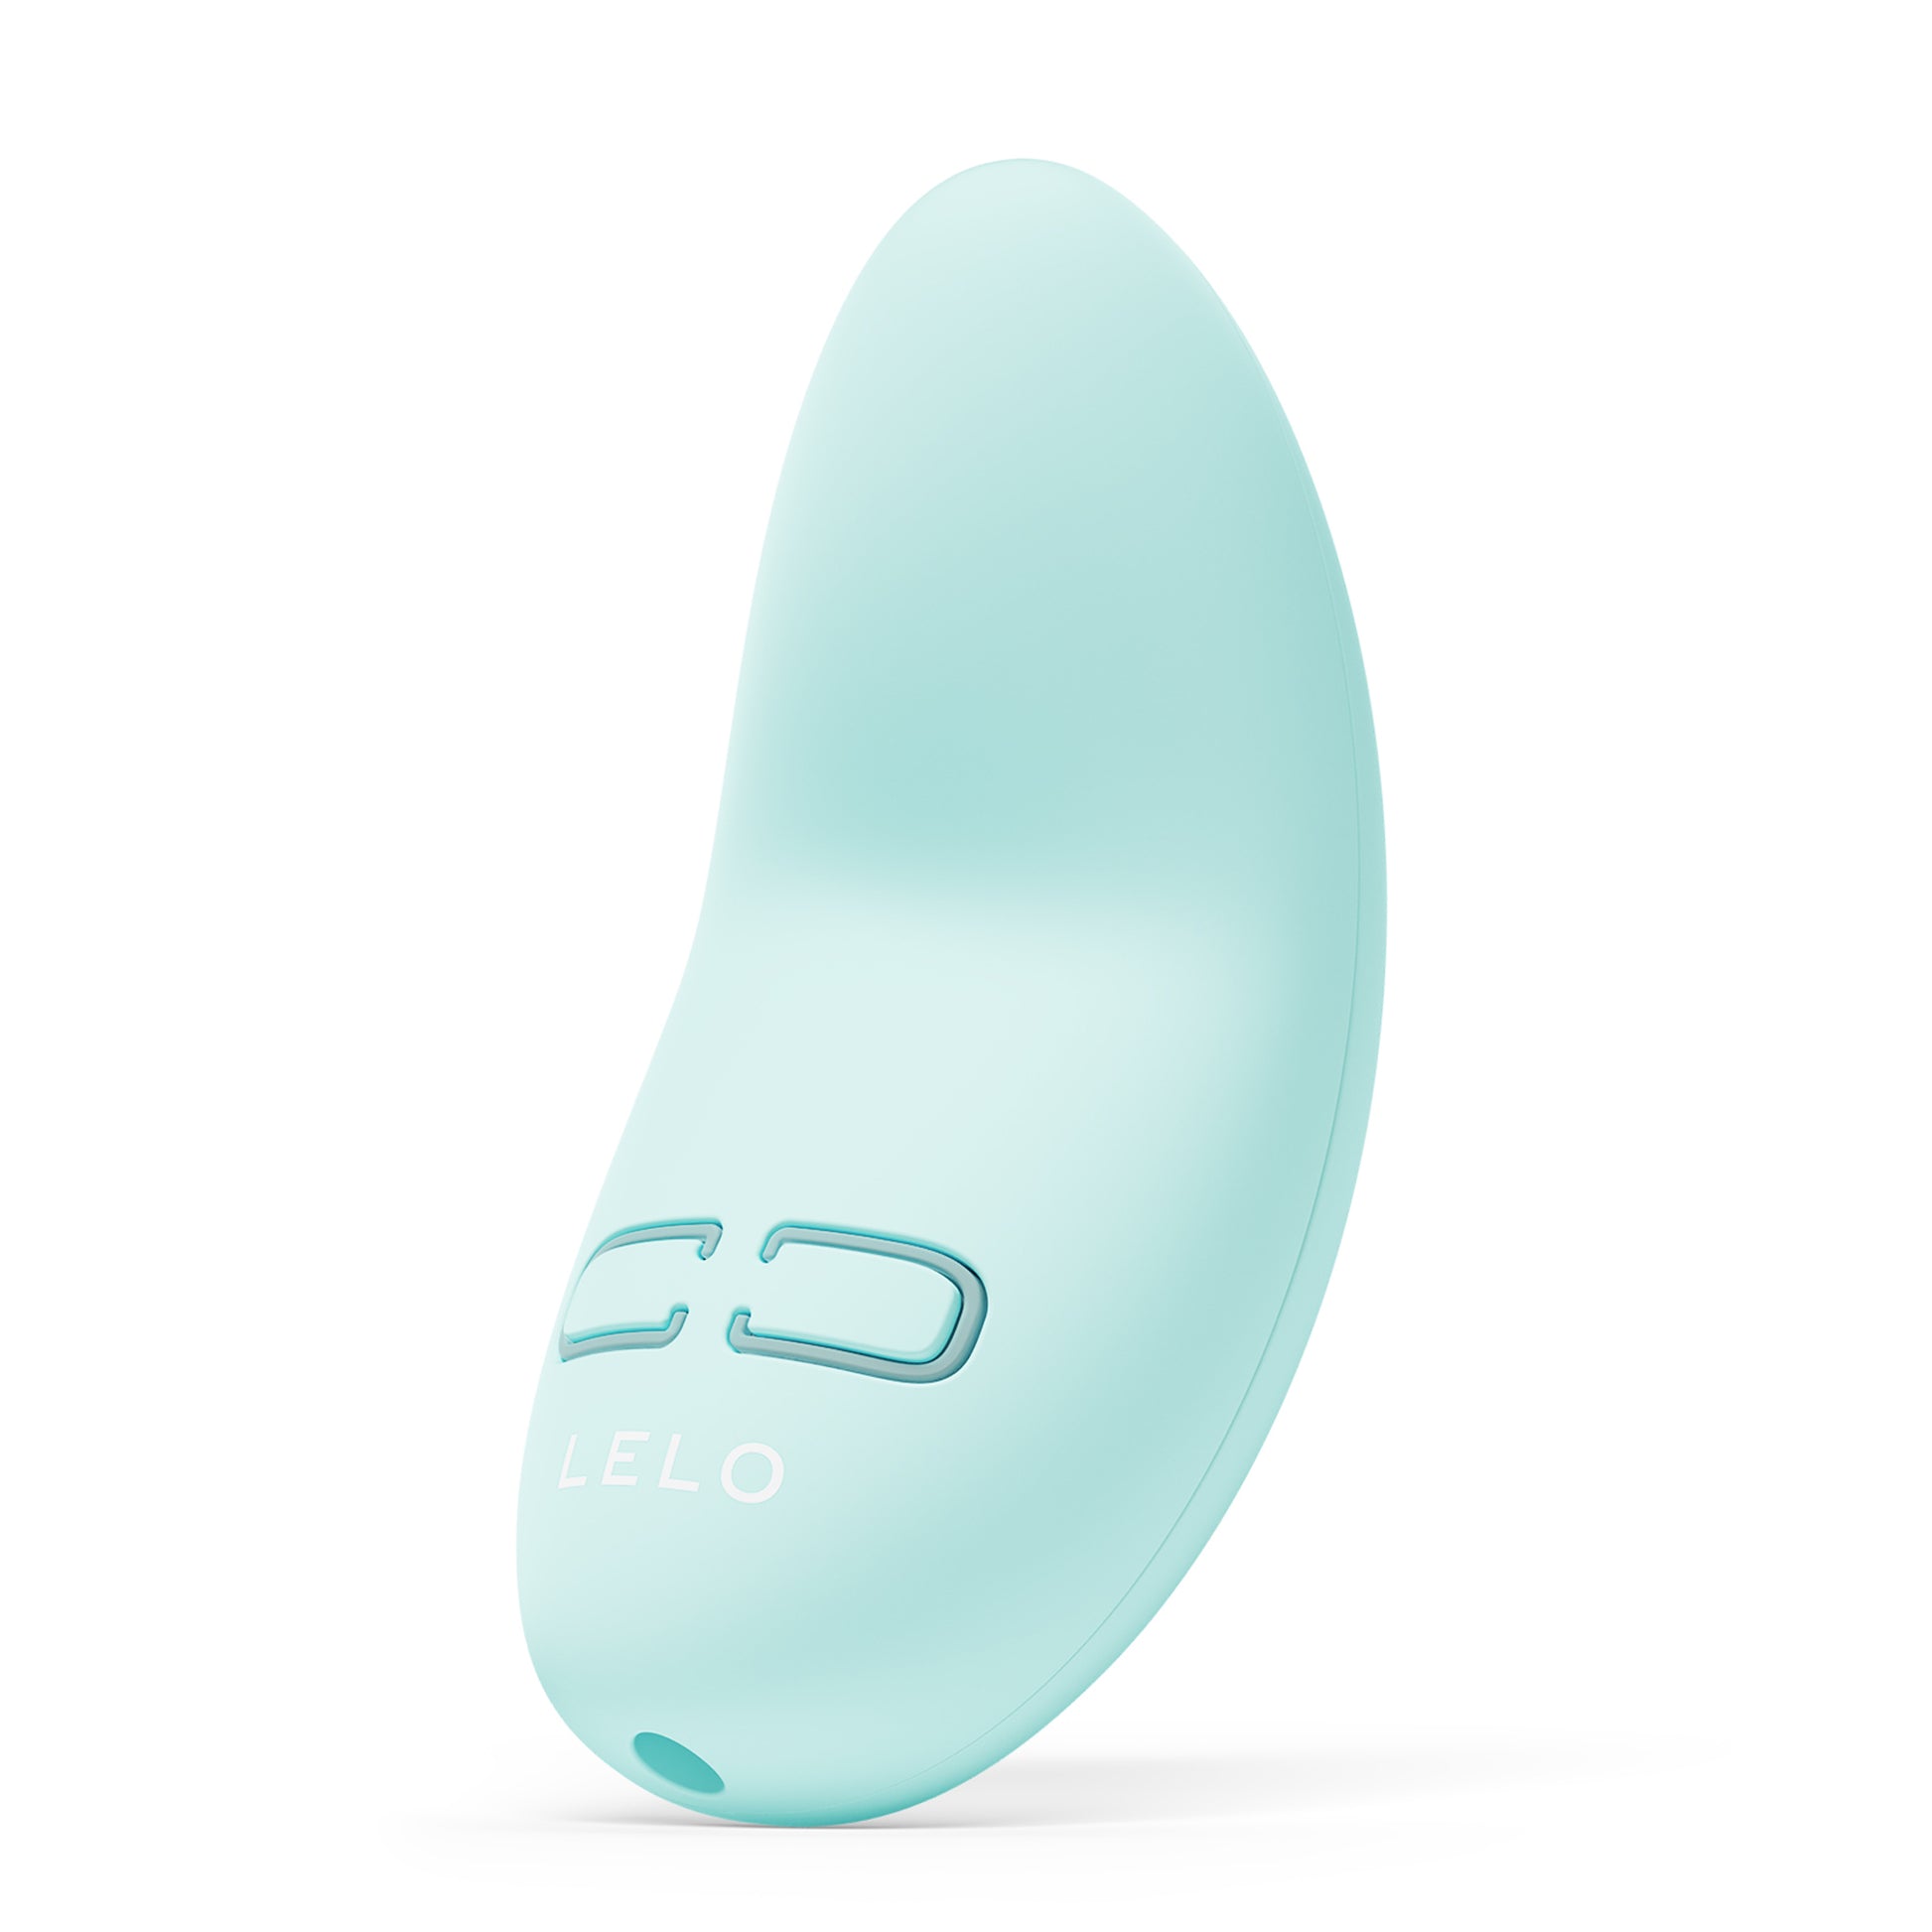 Lelo - Lily 3 Personal Massager Polar Green - 0